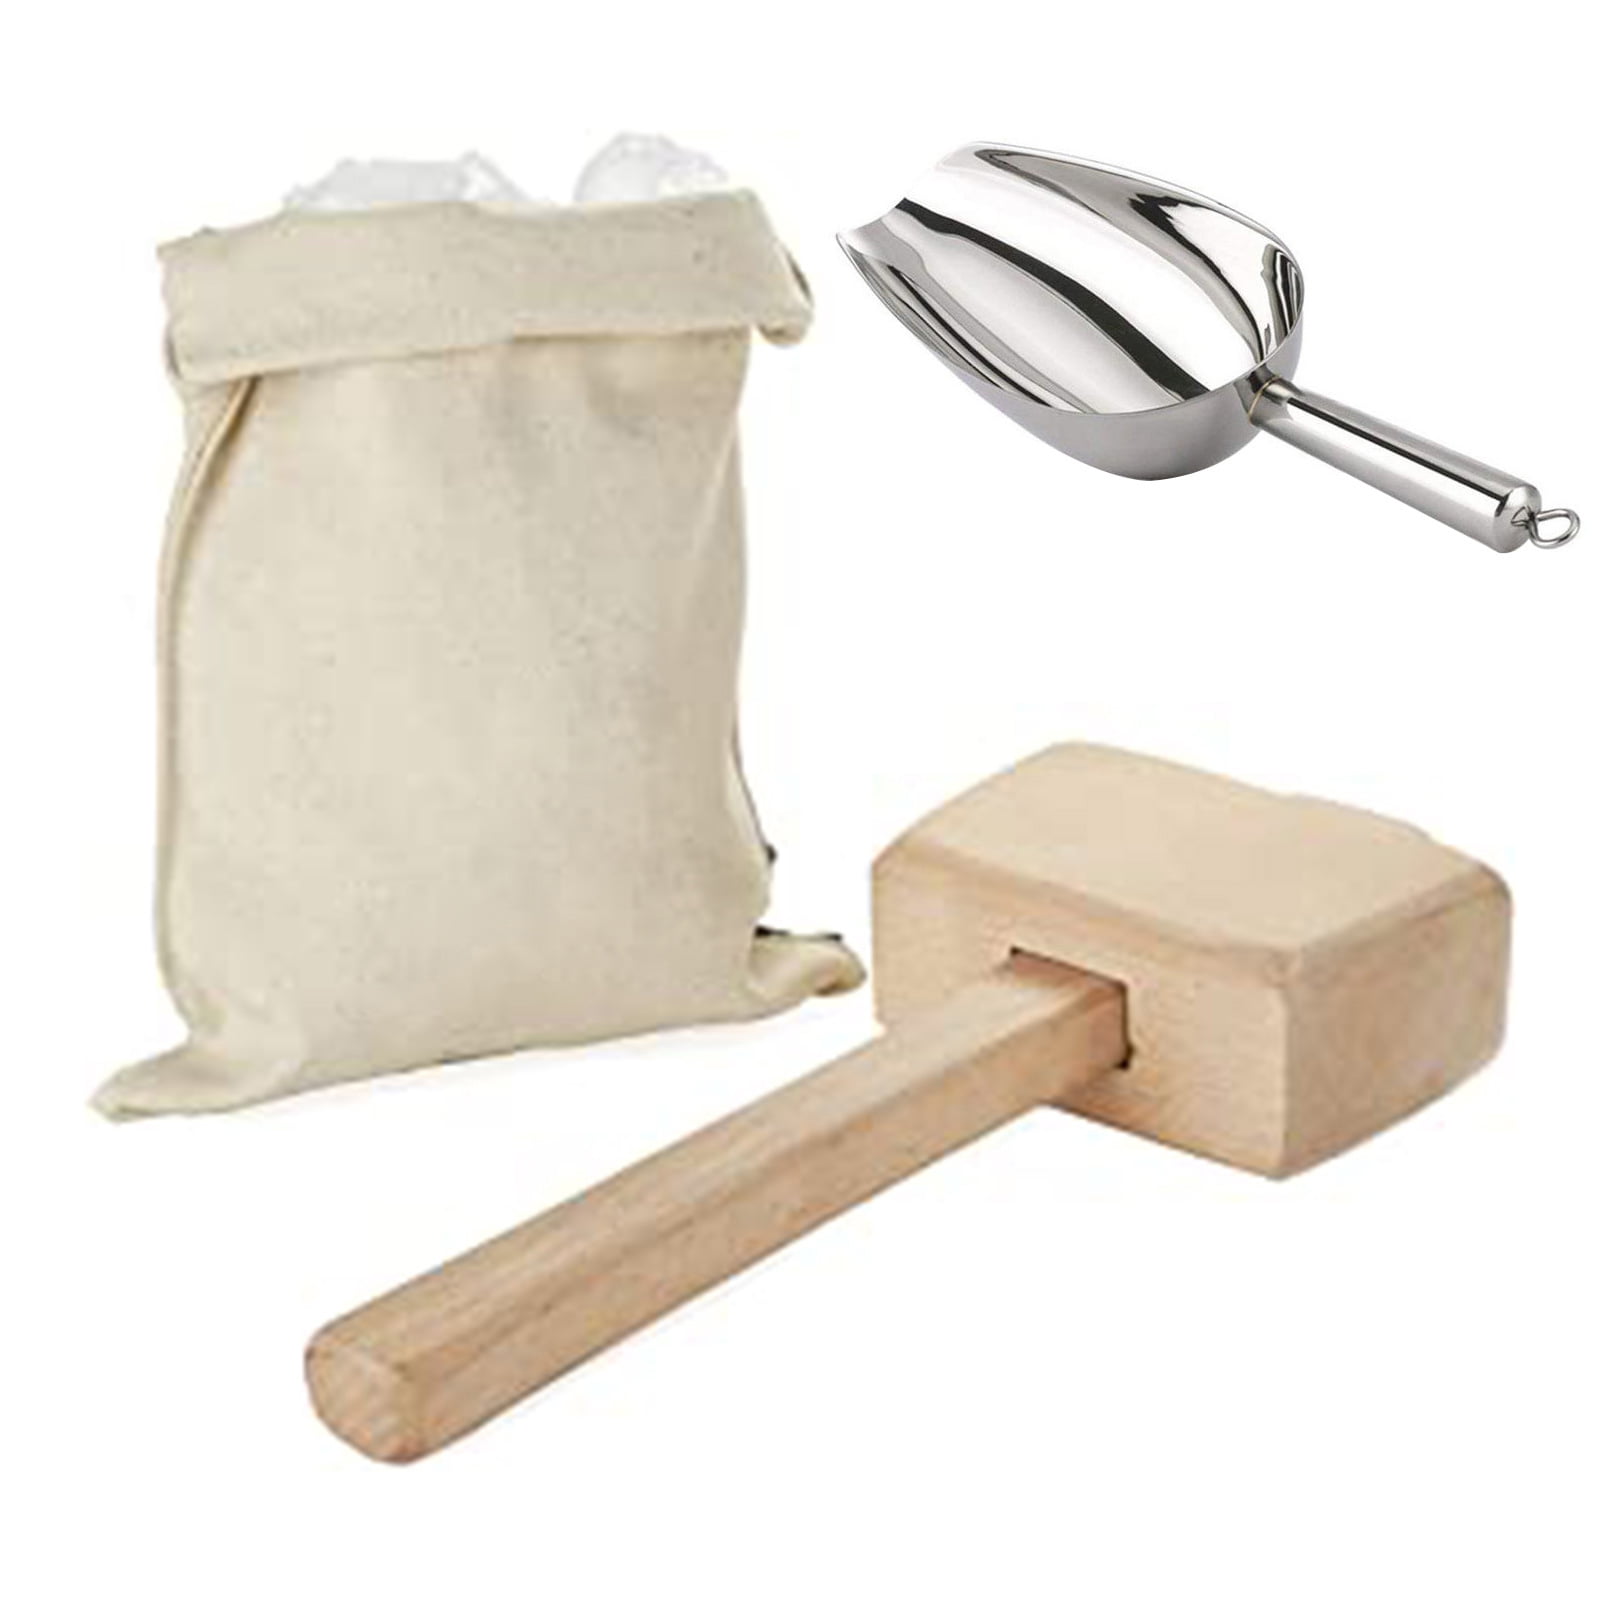 Professional Lewis Ice Bag and Mallet by Viski : Amazon.in: Home & Kitchen